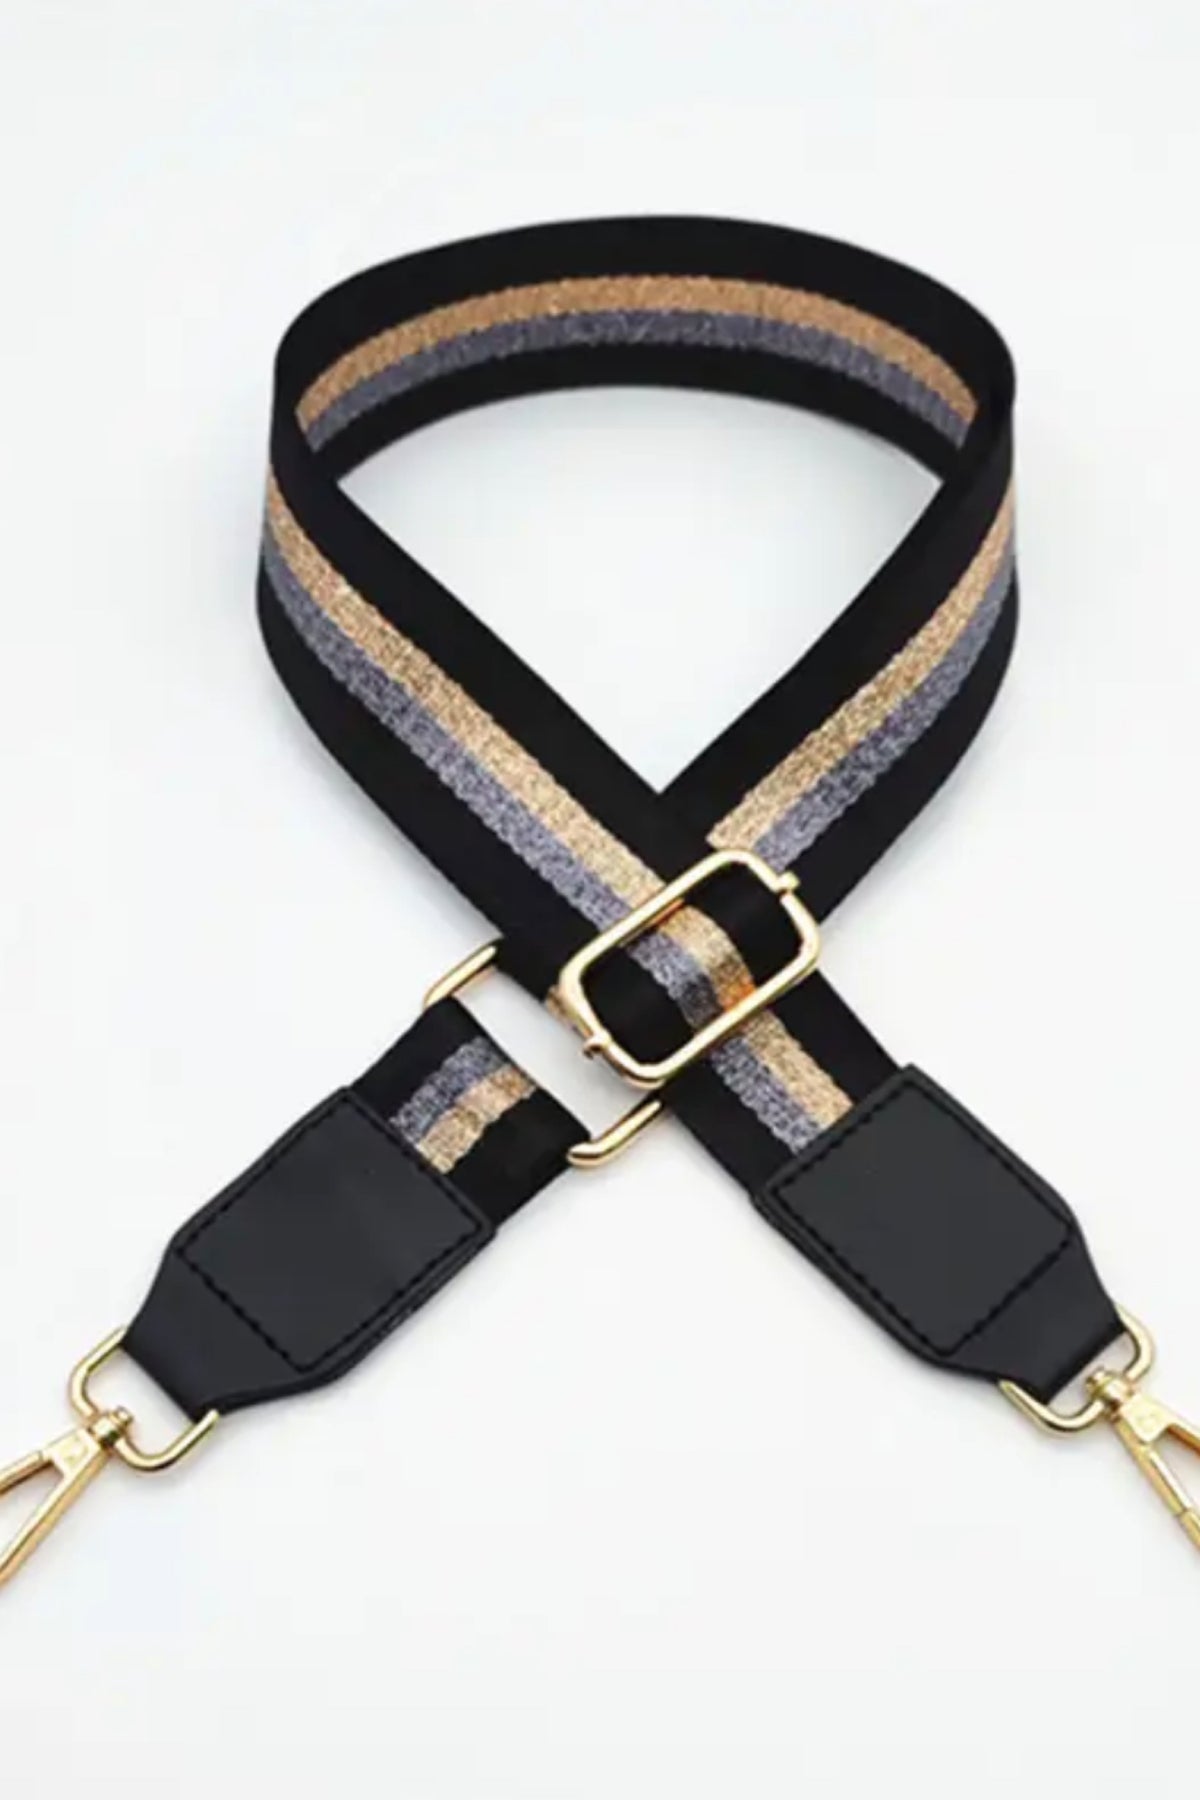 Black With Gold/Charcoal Stripe Bag Strap